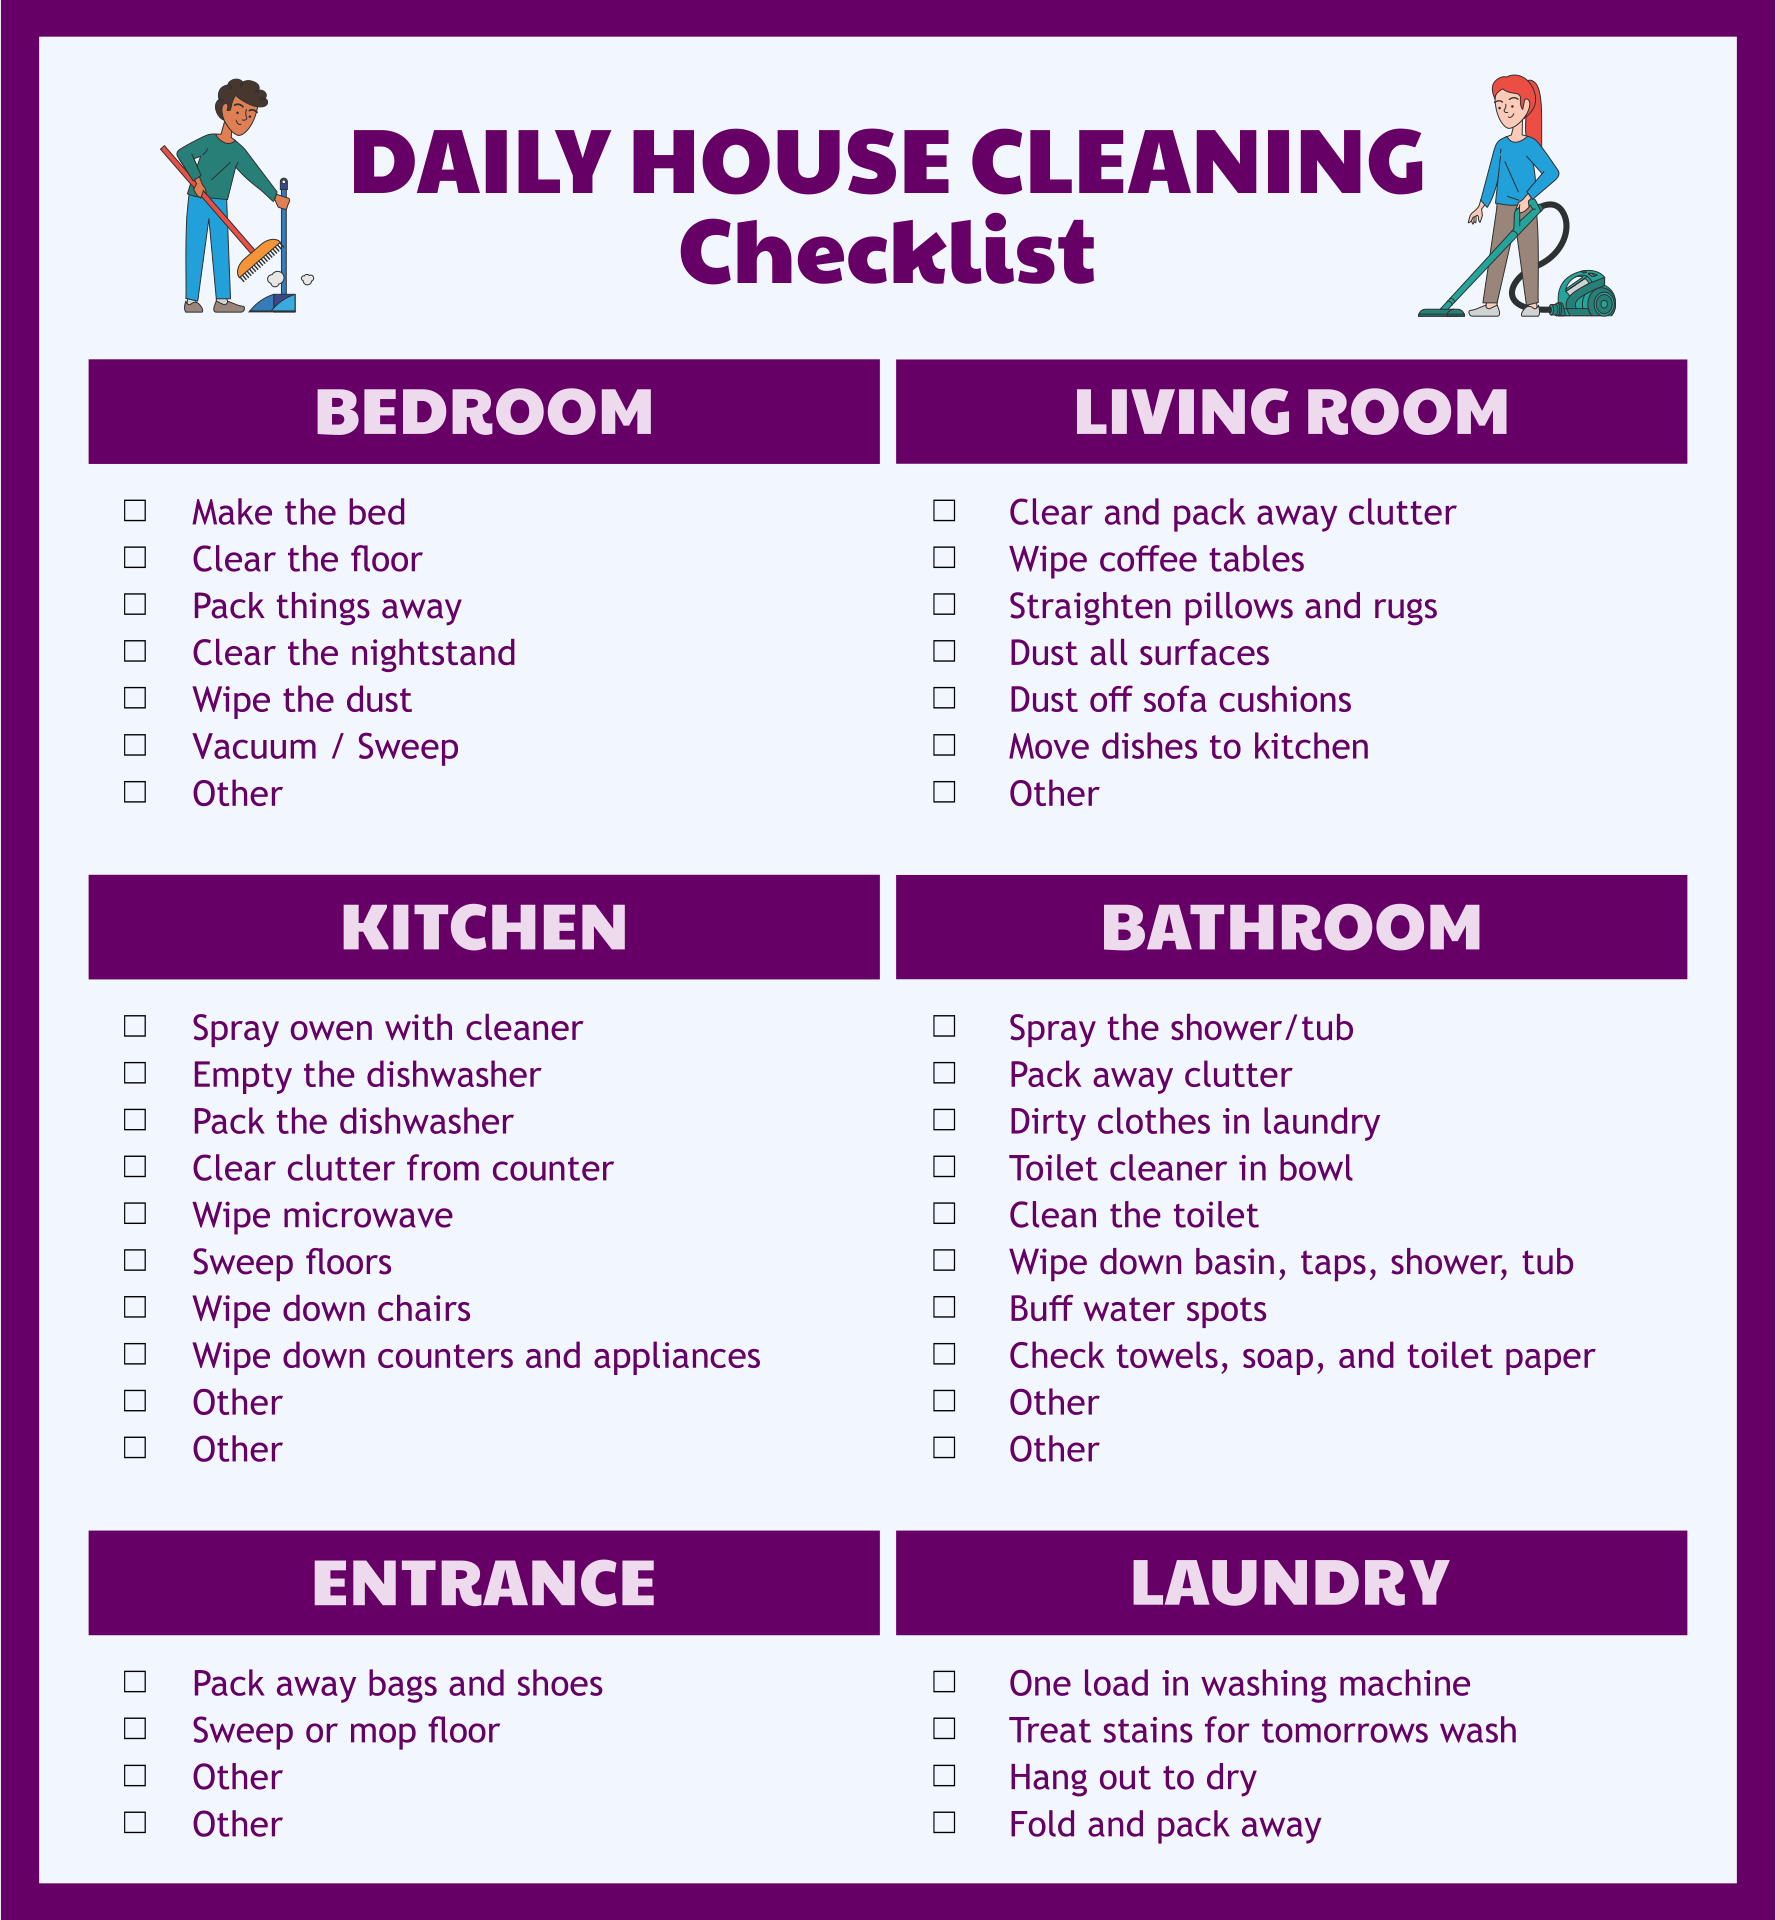 home-cleaning-checklist-free-40-printable-house-cleaning-checklist